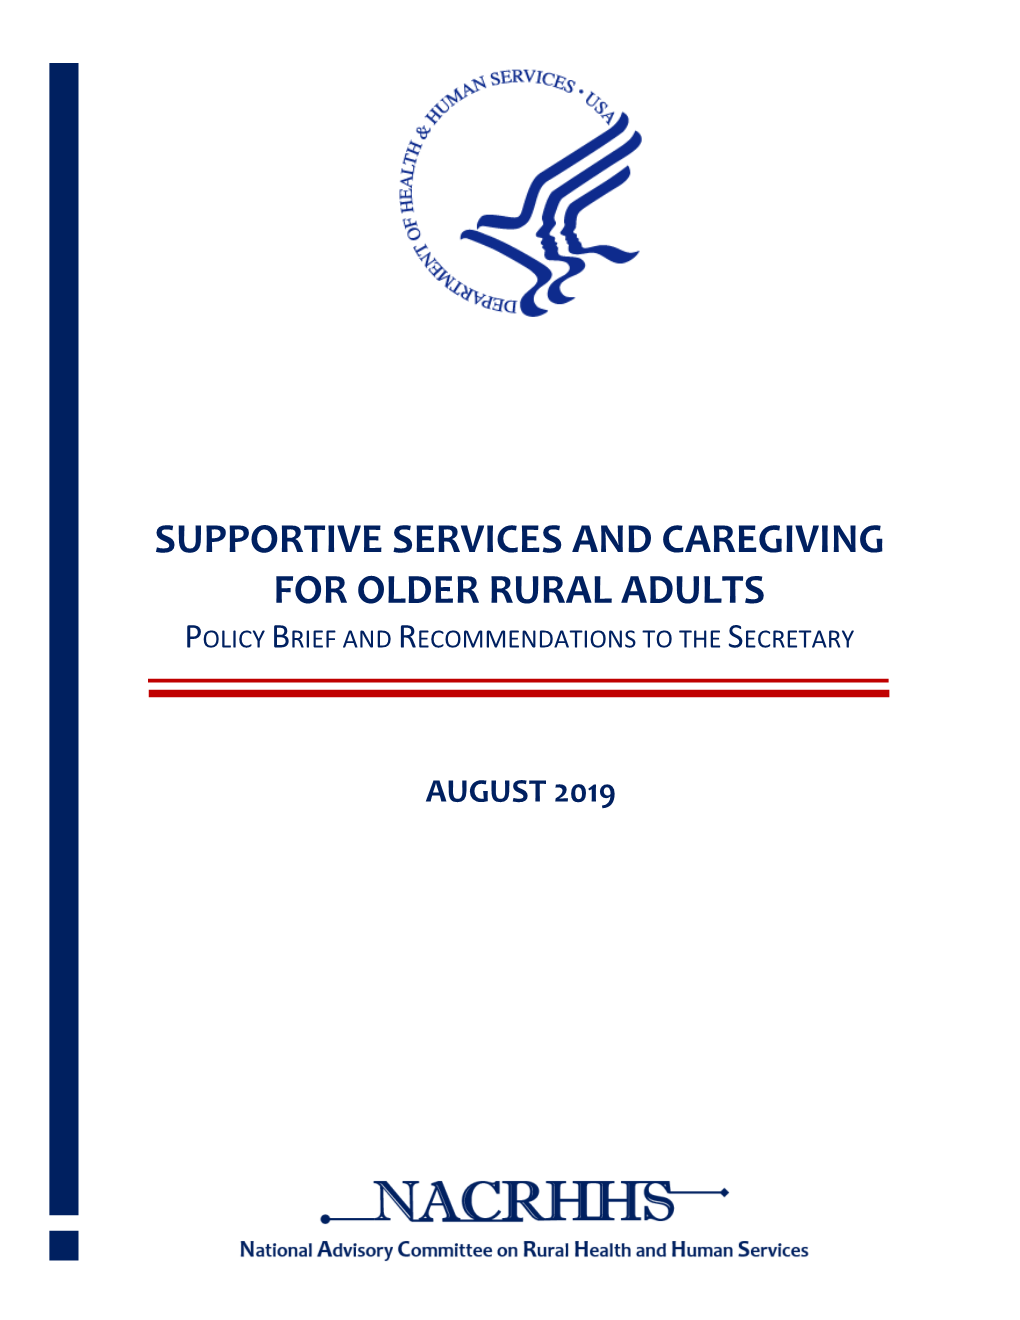 Supportive Services and Caregiving for Older Rural Adults Policy Brief and Recommendations to the Secretary